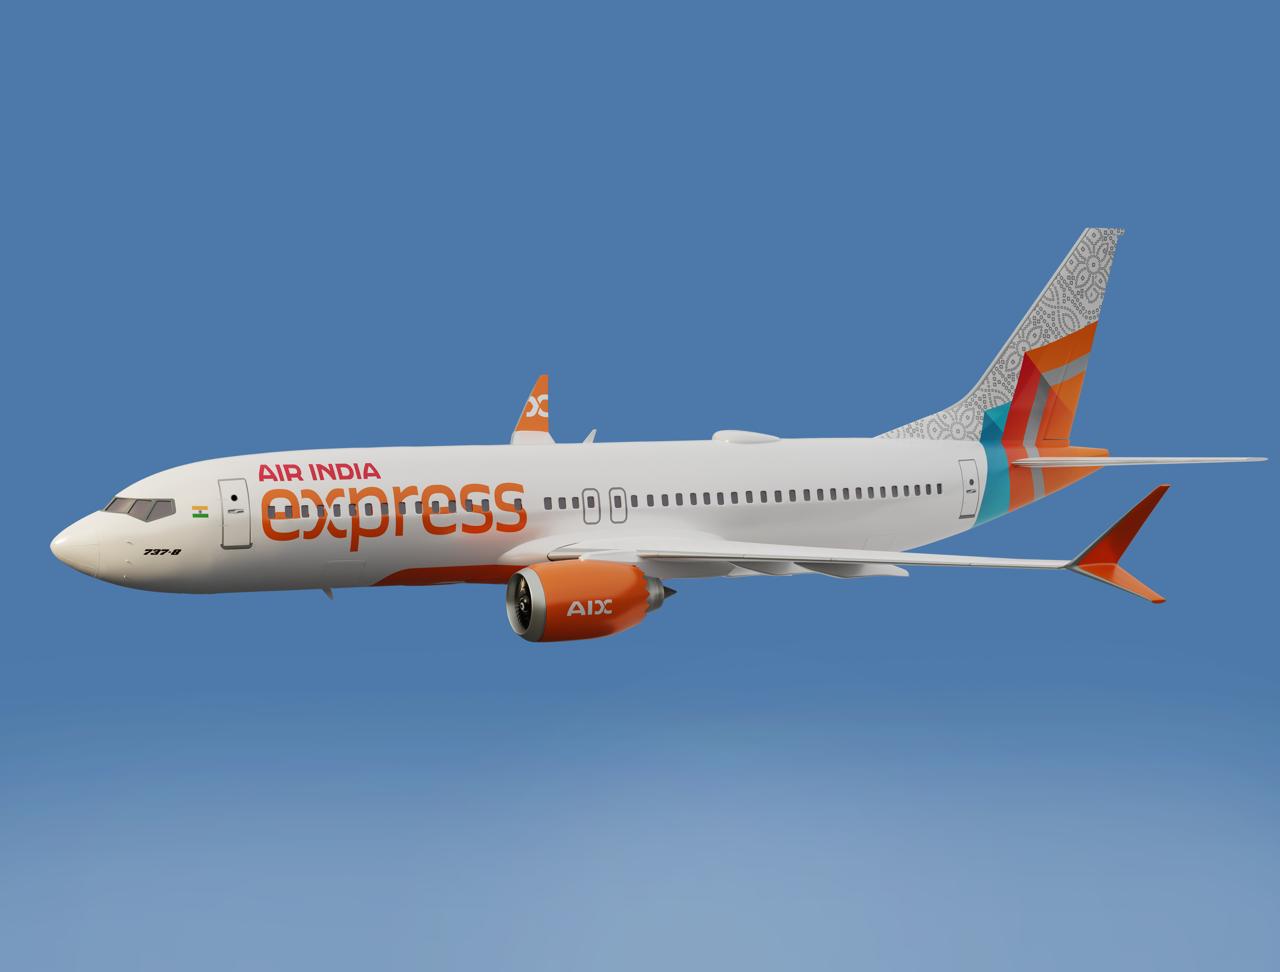 Air India Express Unveils New Brand Identity and Aircraft Livery